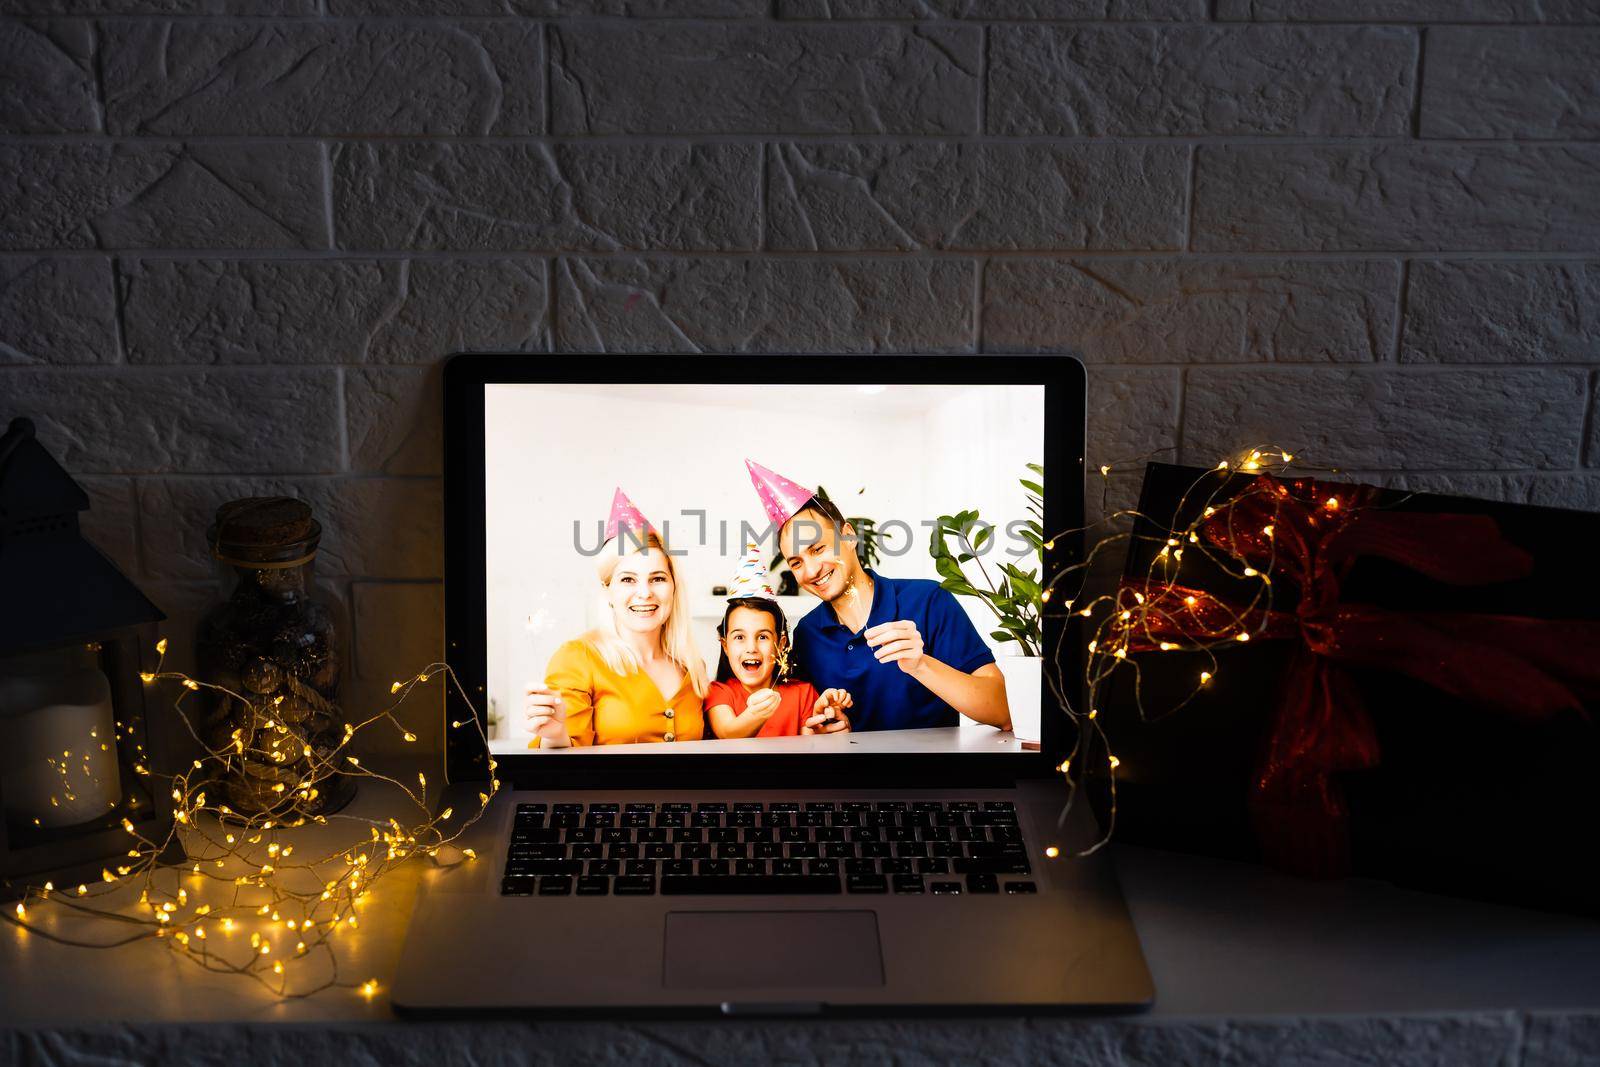 young family video call smiling and looking at webcam web, lovers greet friends merry christmas and happy new year.